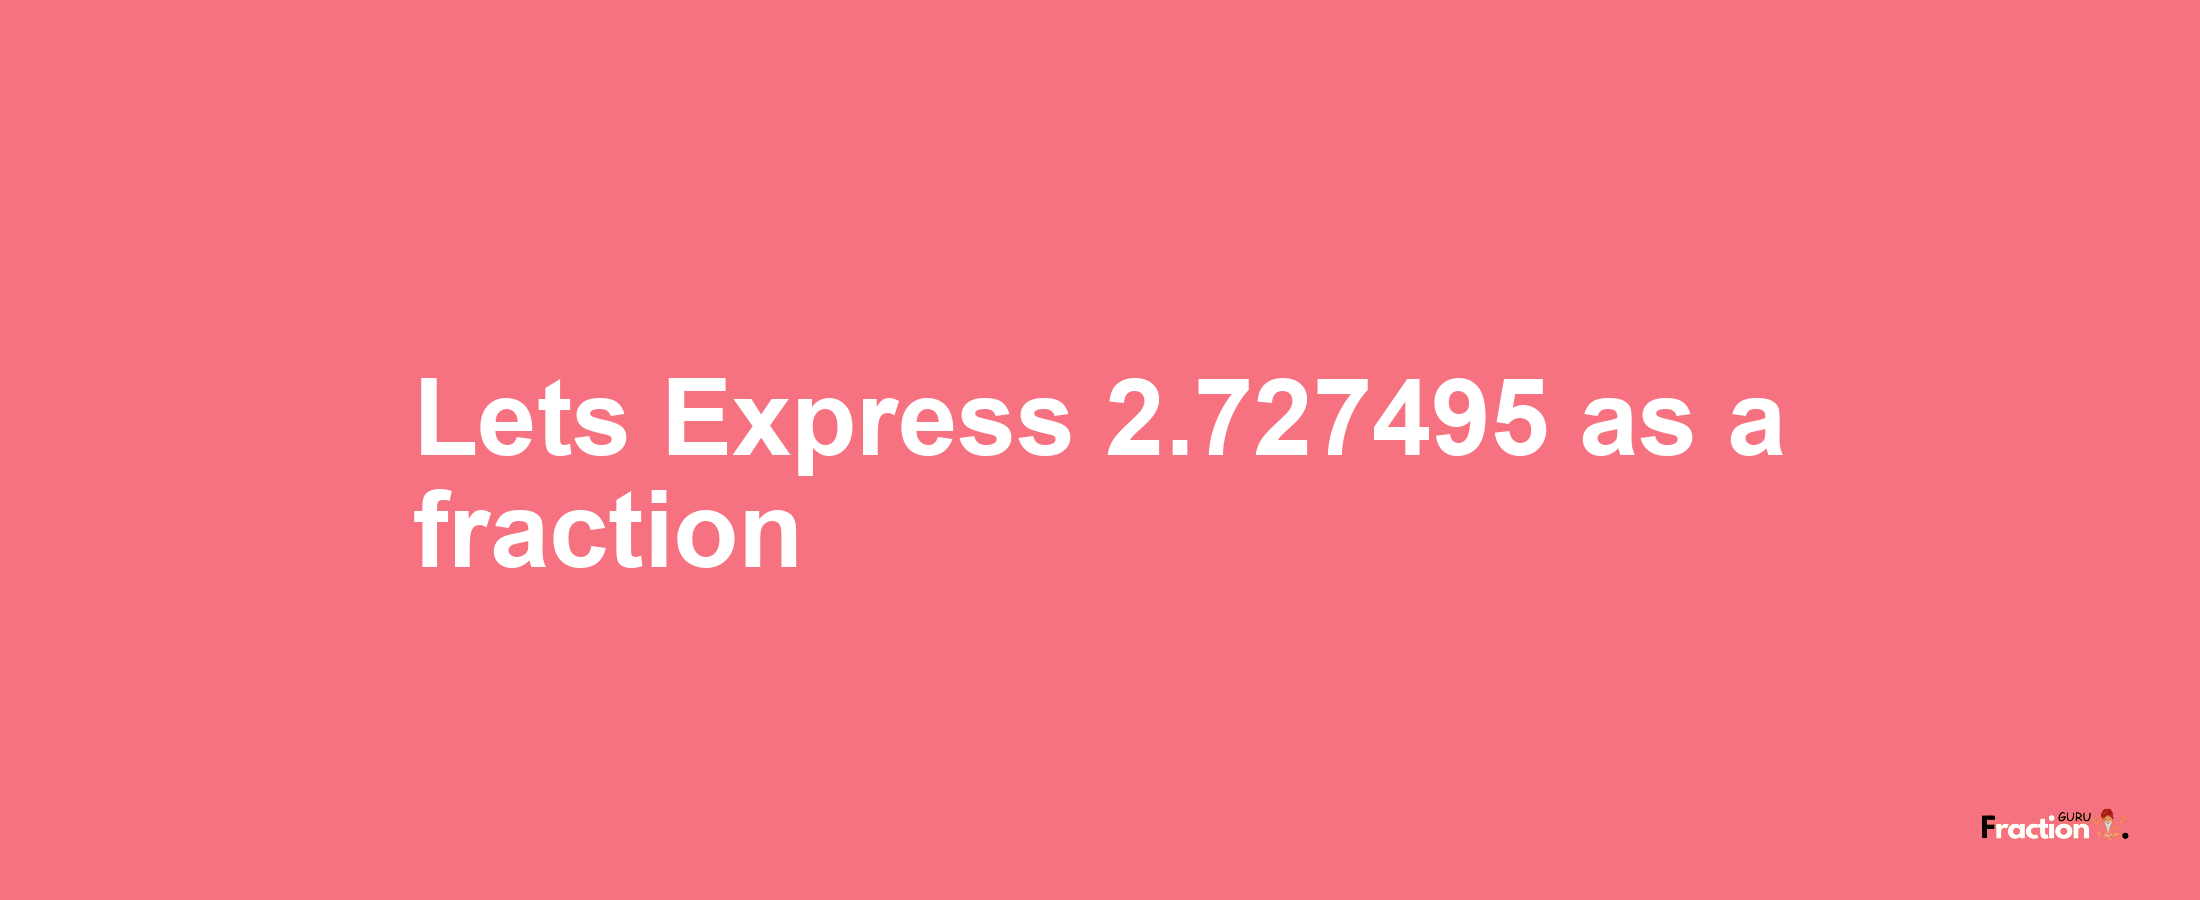 Lets Express 2.727495 as afraction